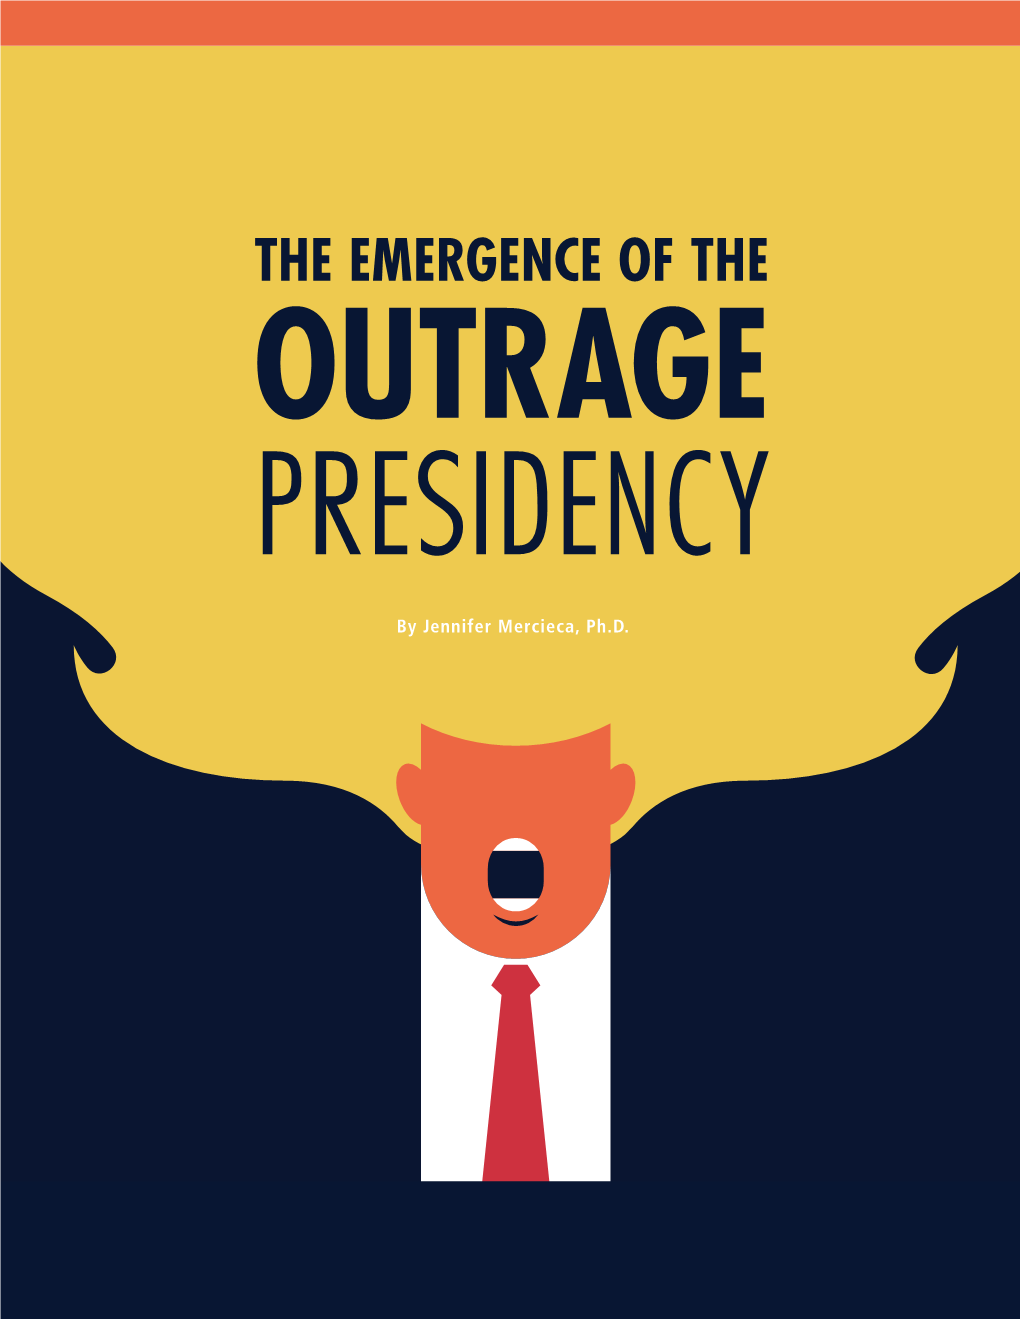 The Emergence of the Outrage Presidency